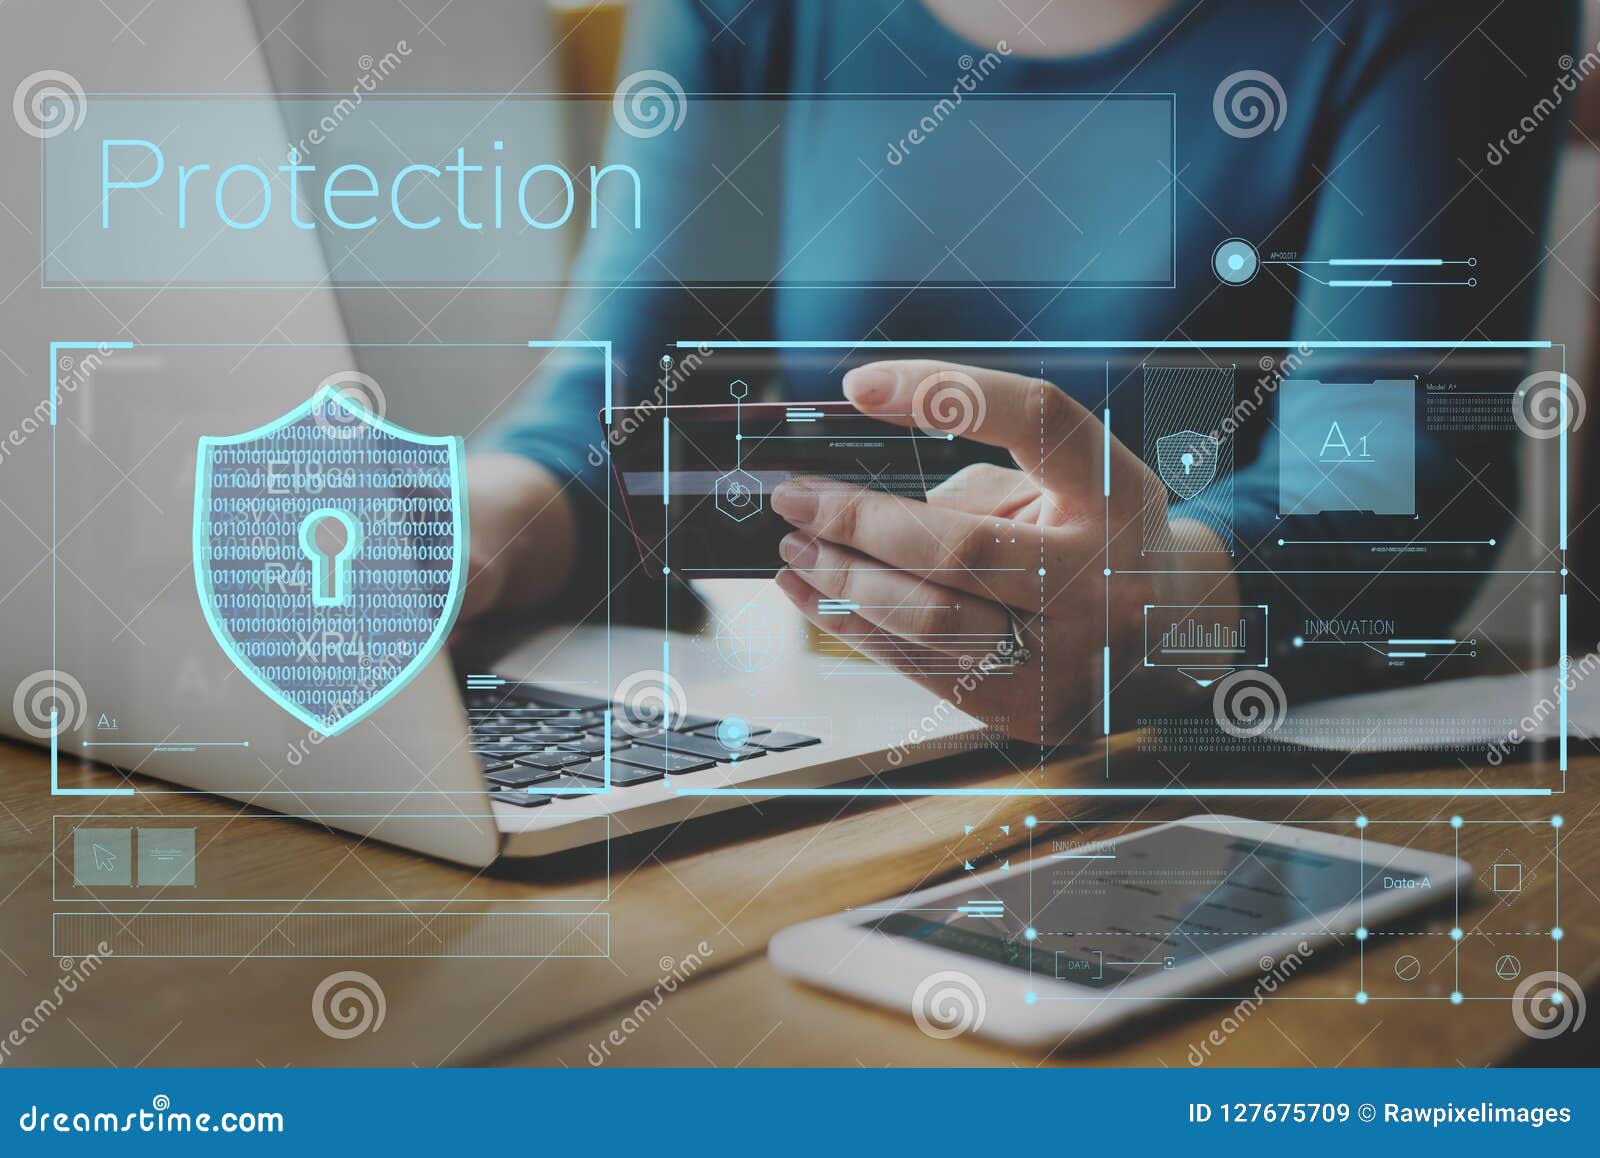 data security system shield protection verification